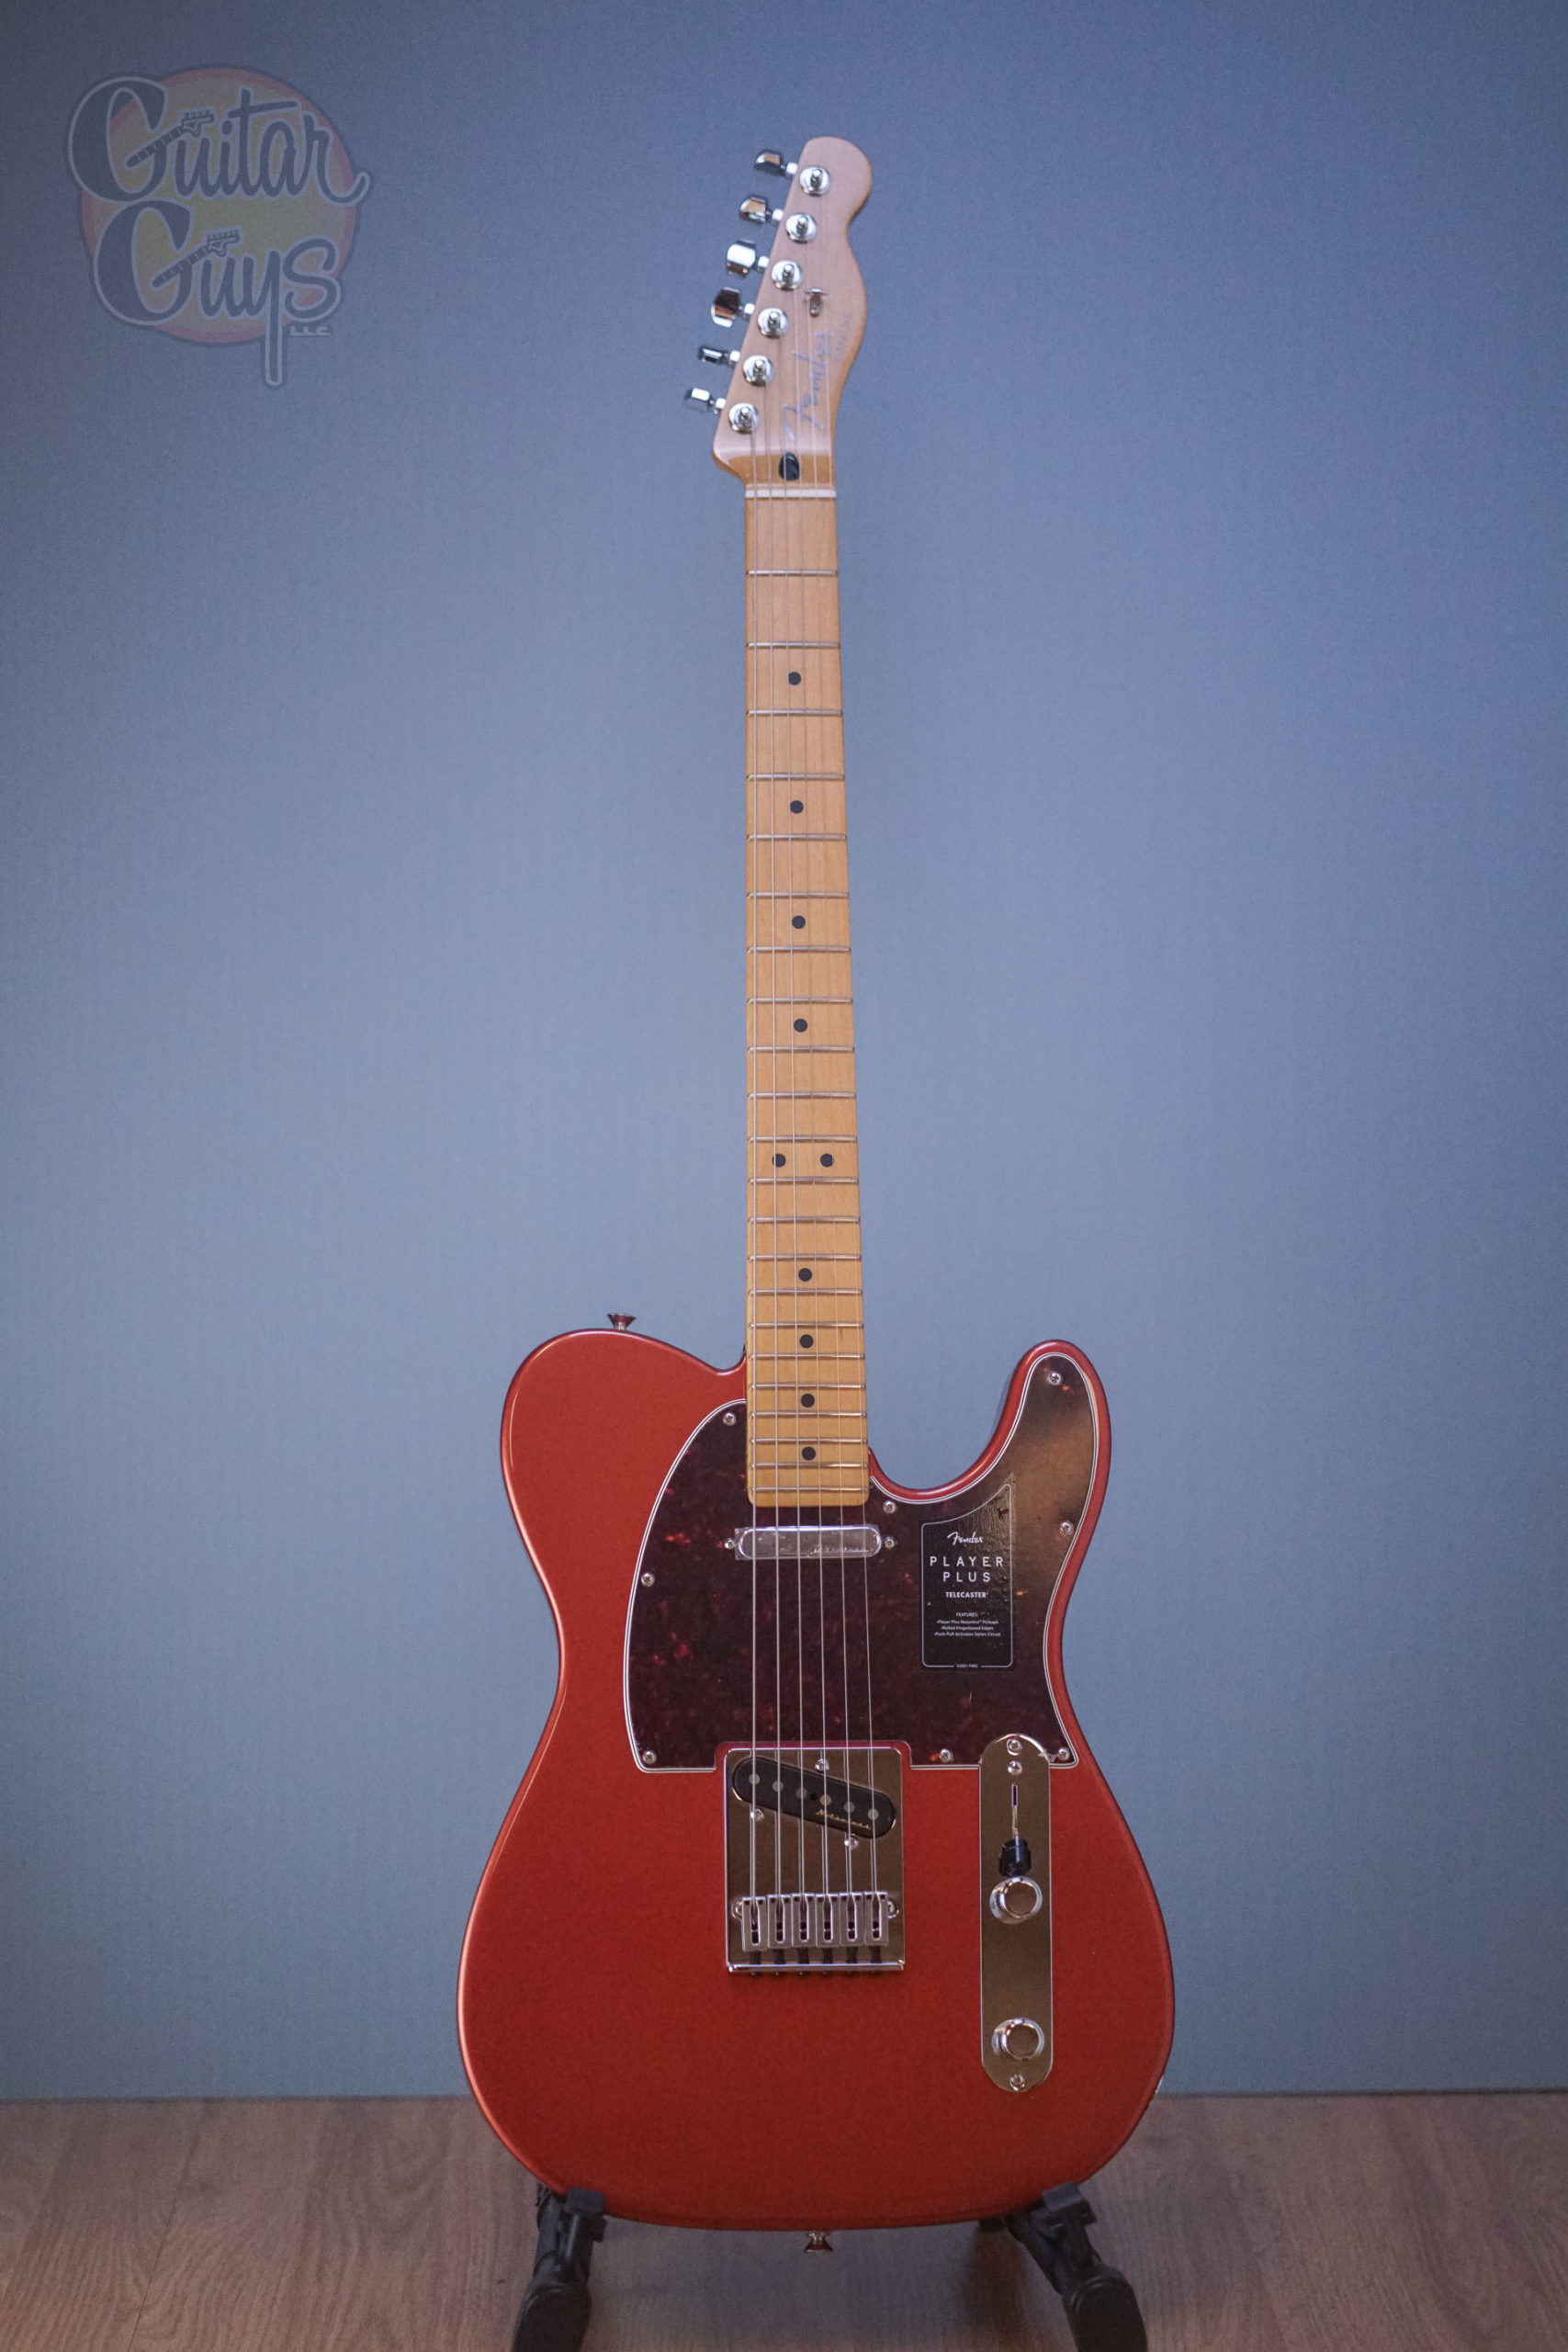 Fender Player Plus Telecaster MN Aged Candy Apple Red